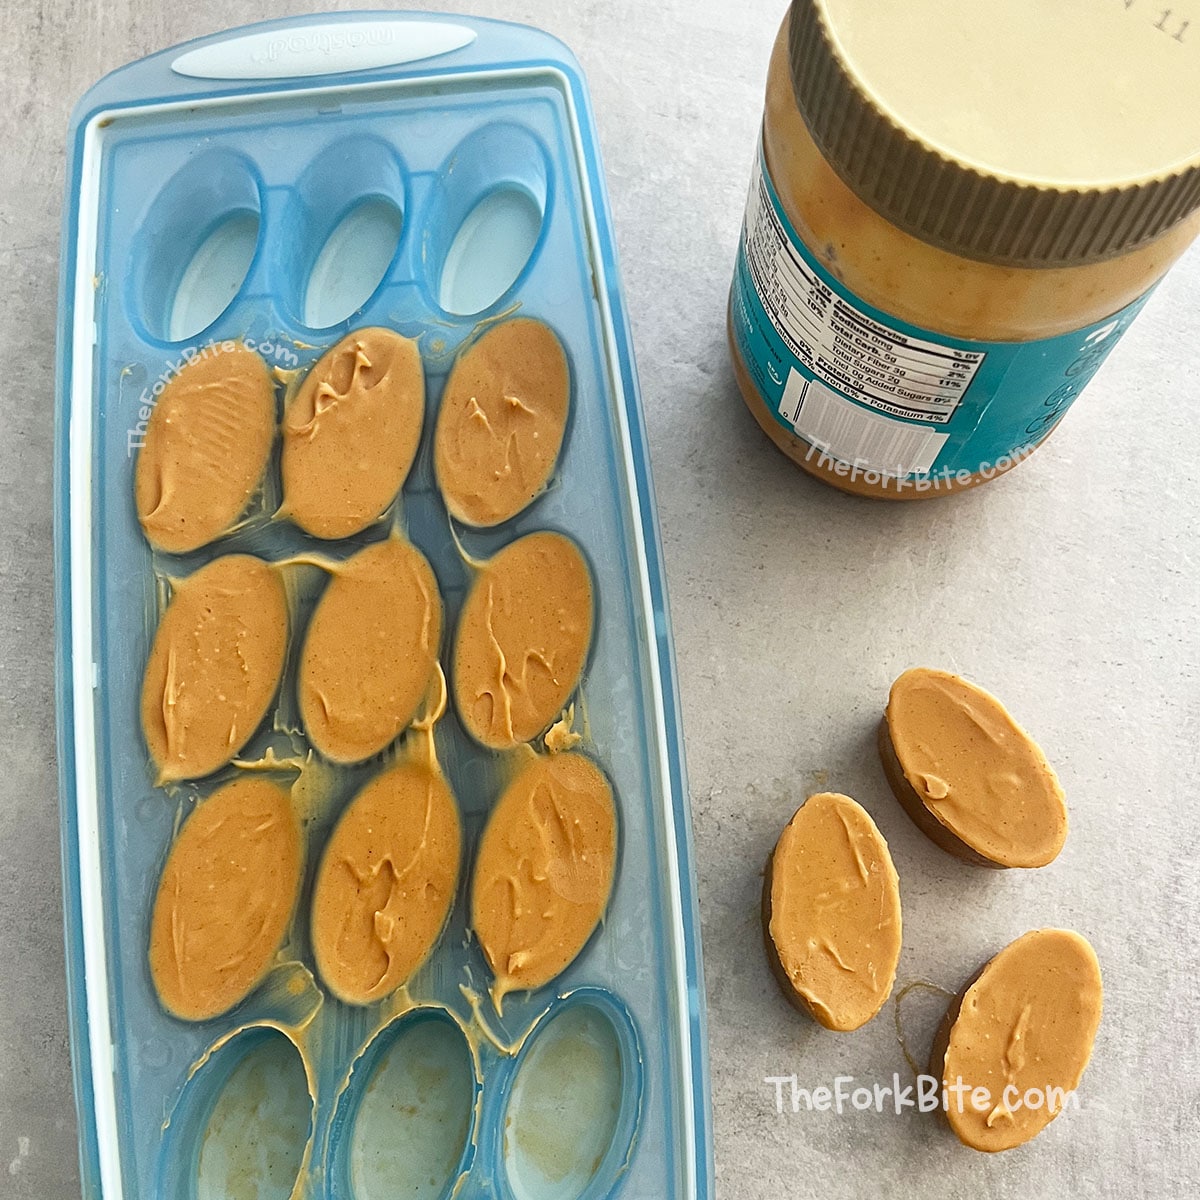 Fill ice cube trays with peanut butter and freeze them to make smaller servings. Tap the tray to release the air bubbles, wrap the tray in plastic, and flash freeze for one or two hours. After they have frozen solid, you can transfer them into a resealable plastic bag